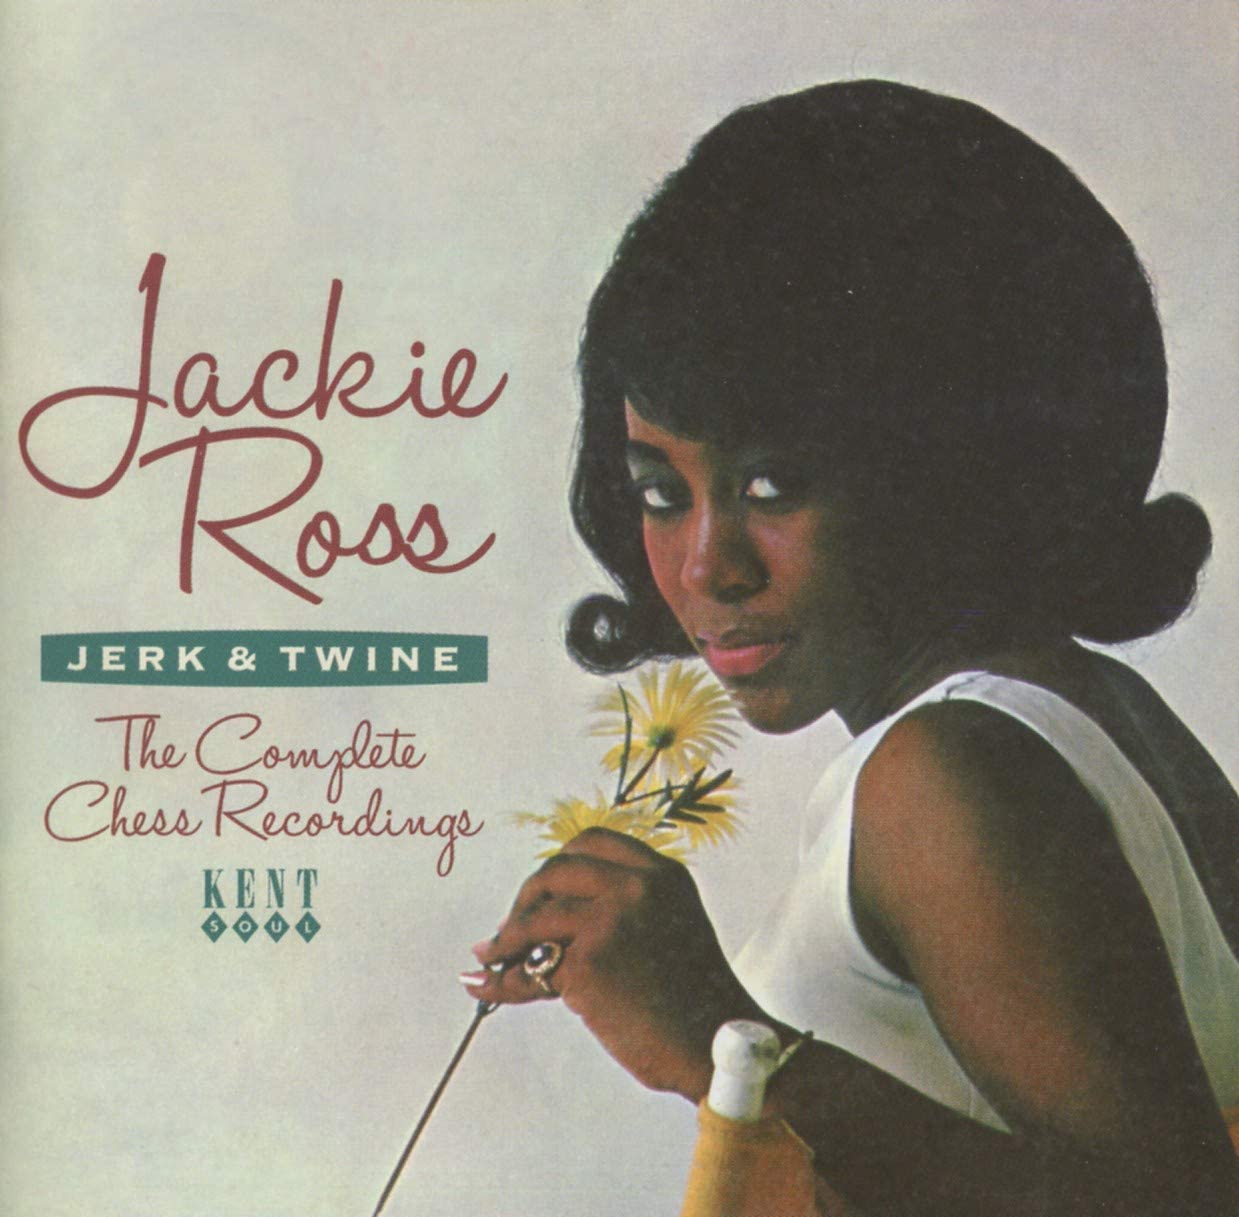 Jackie Ross - Jerk & Twine The Complete Chess Recordings - CD